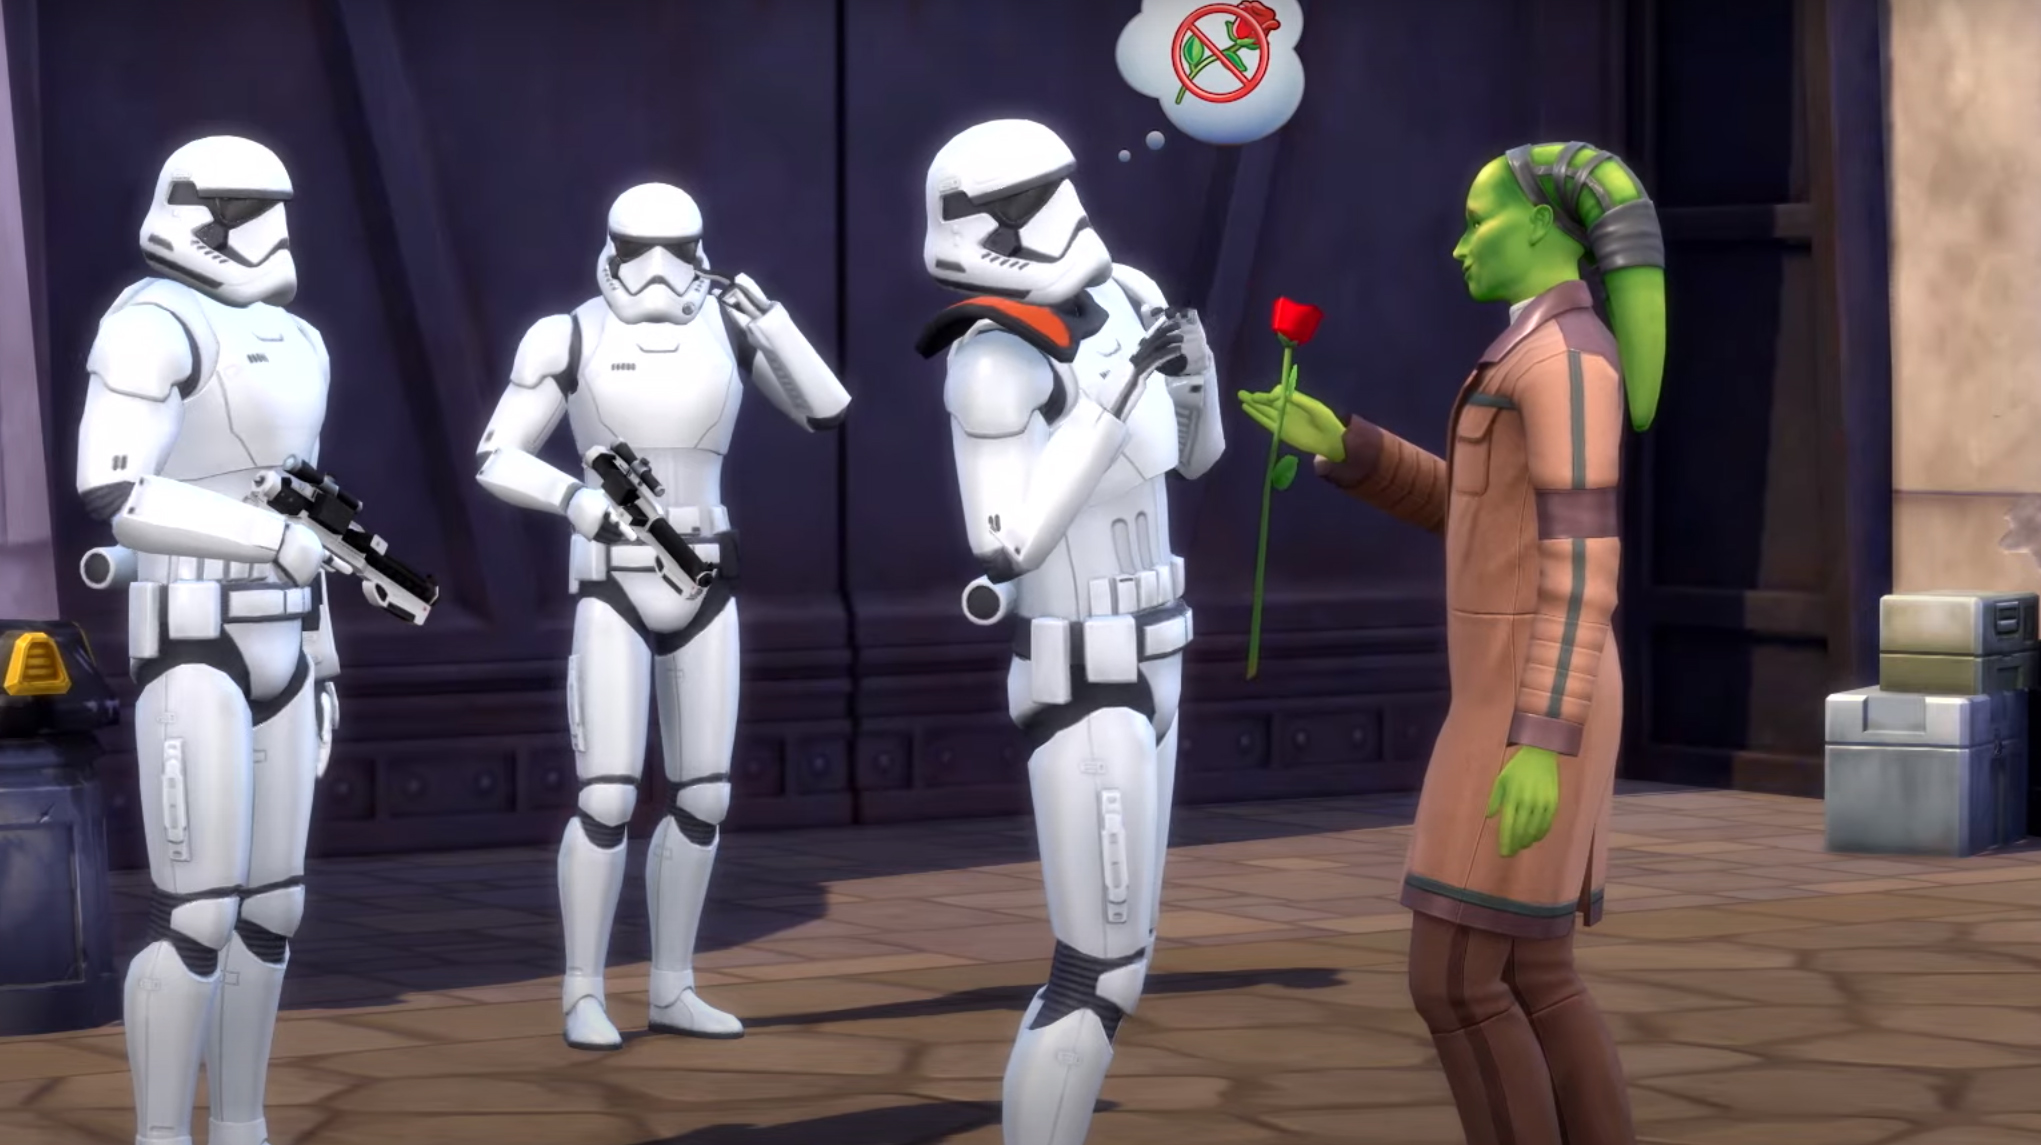  The Sims 4 is getting a Star Wars pack, and it looks pretty great 